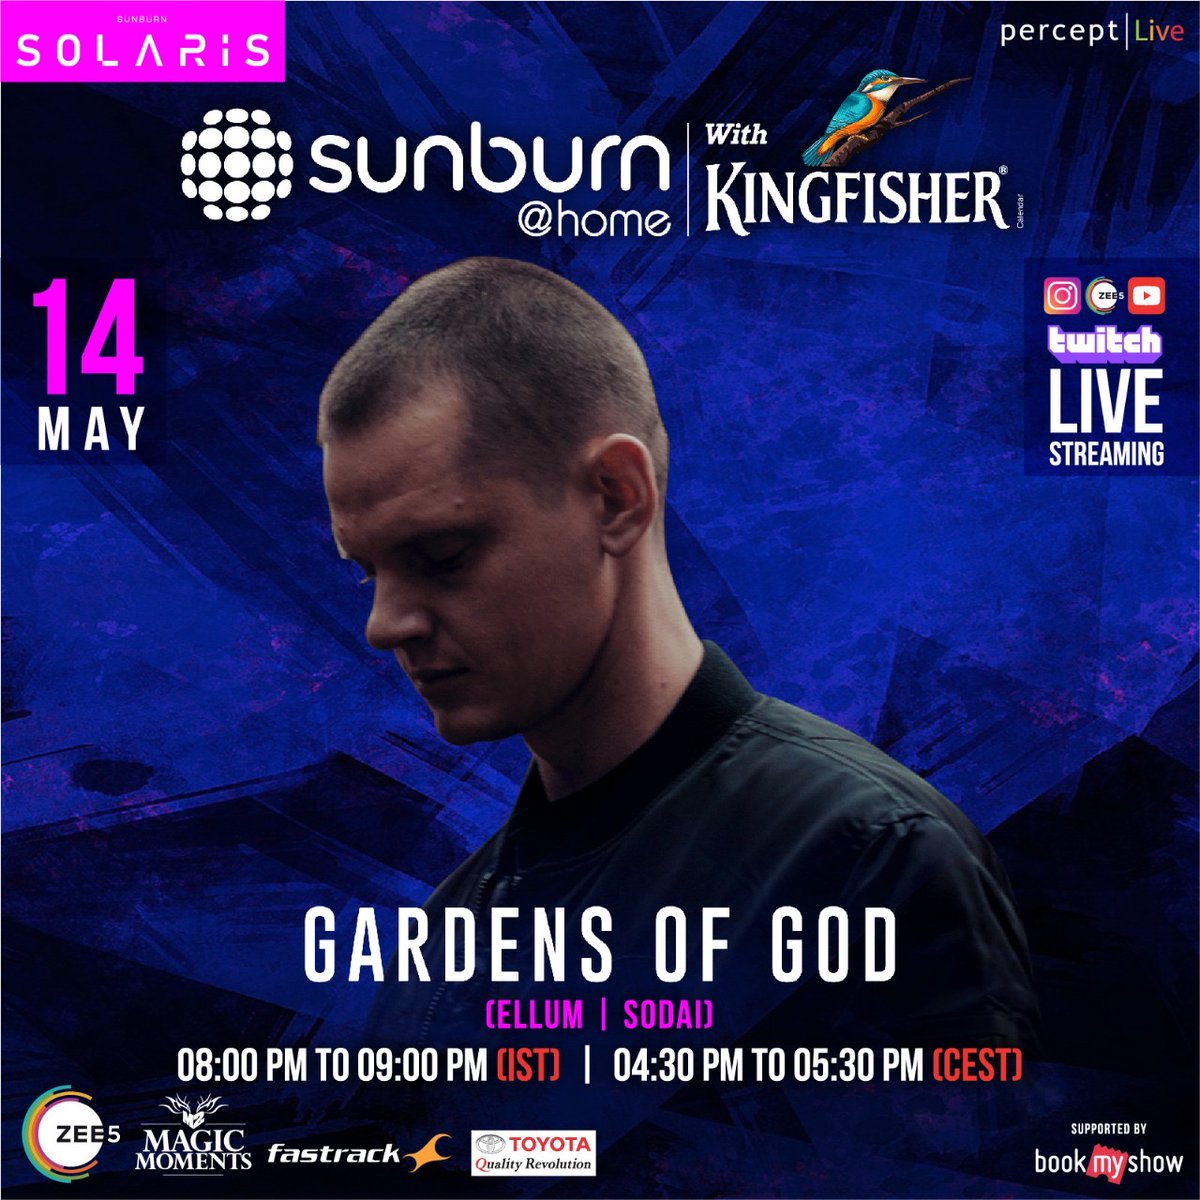 The Italian DJ & Producer known globally as the Seasoned Veteran of Techno @SashaCarassi  to Takeover #SunburnAtHome for our special #SunburnSolaris Edition ☀️alongside the Immensely popular @deepeshofficial  & @gardensofgod  this 14th. Don't forget to tune in!